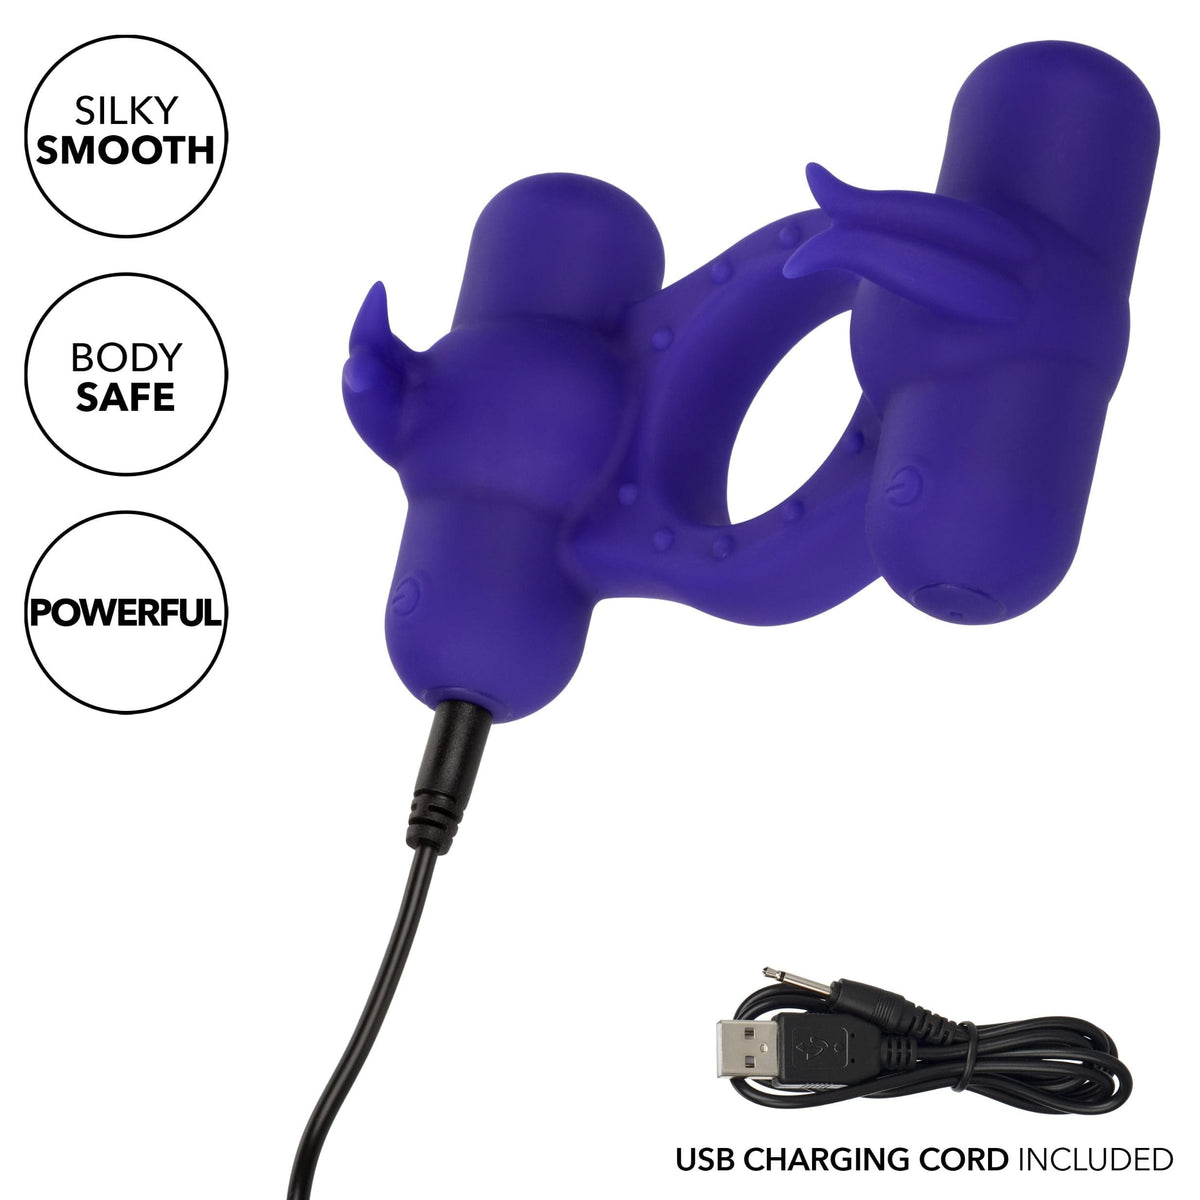 silicone rechargeable triple orgasm enhancer purple